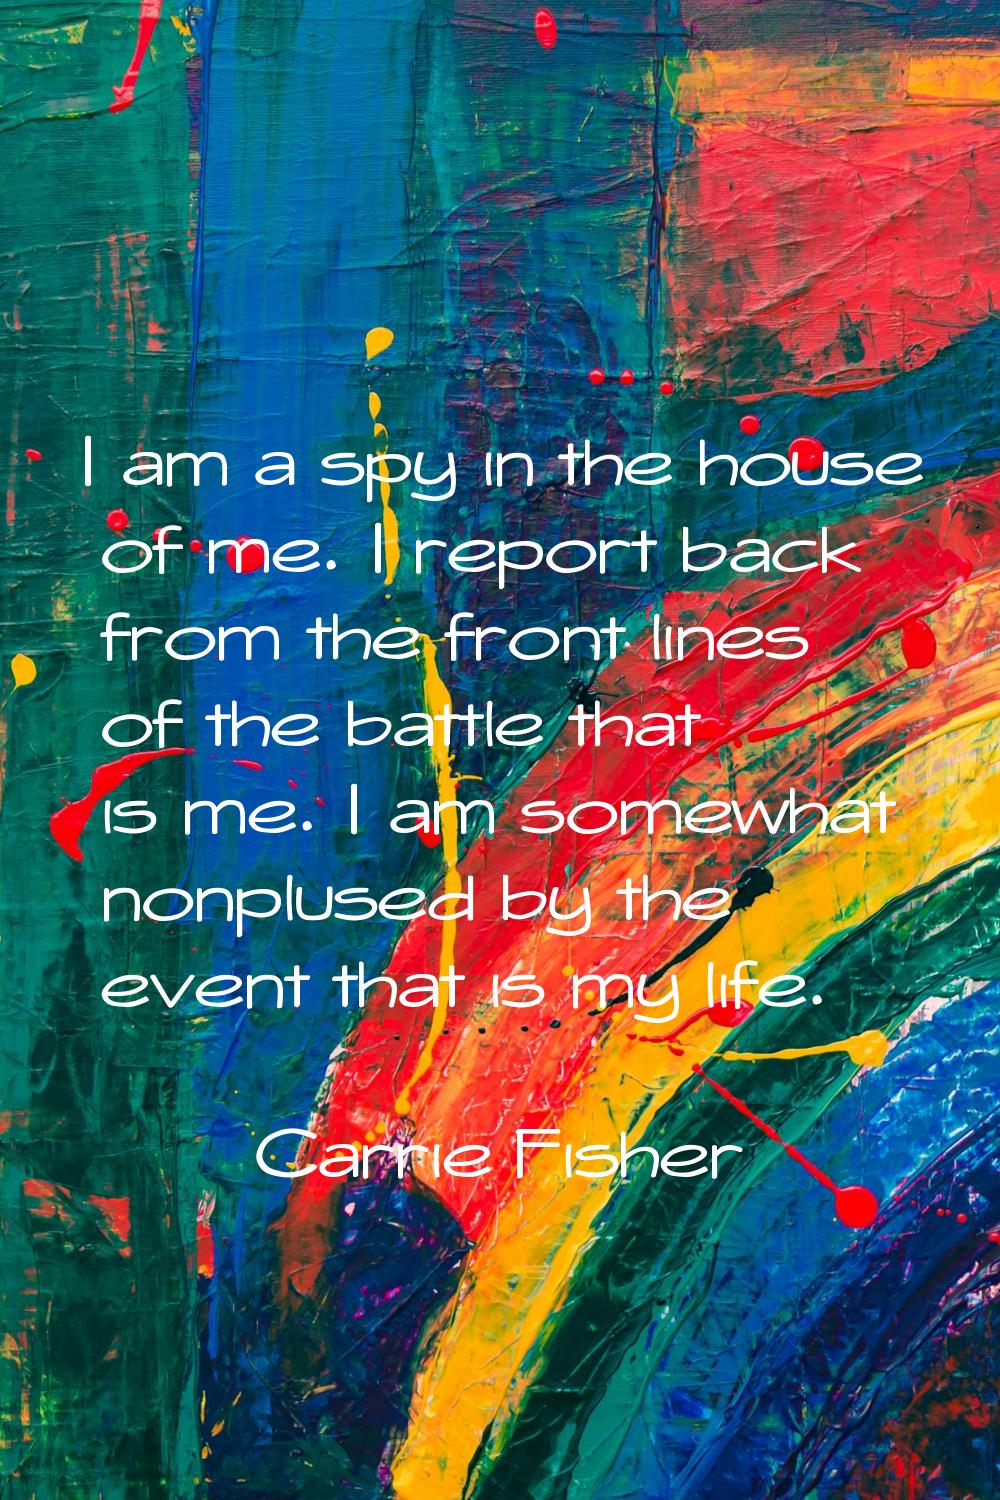 I am a spy in the house of me. I report back from the front lines of the battle that is me. I am so